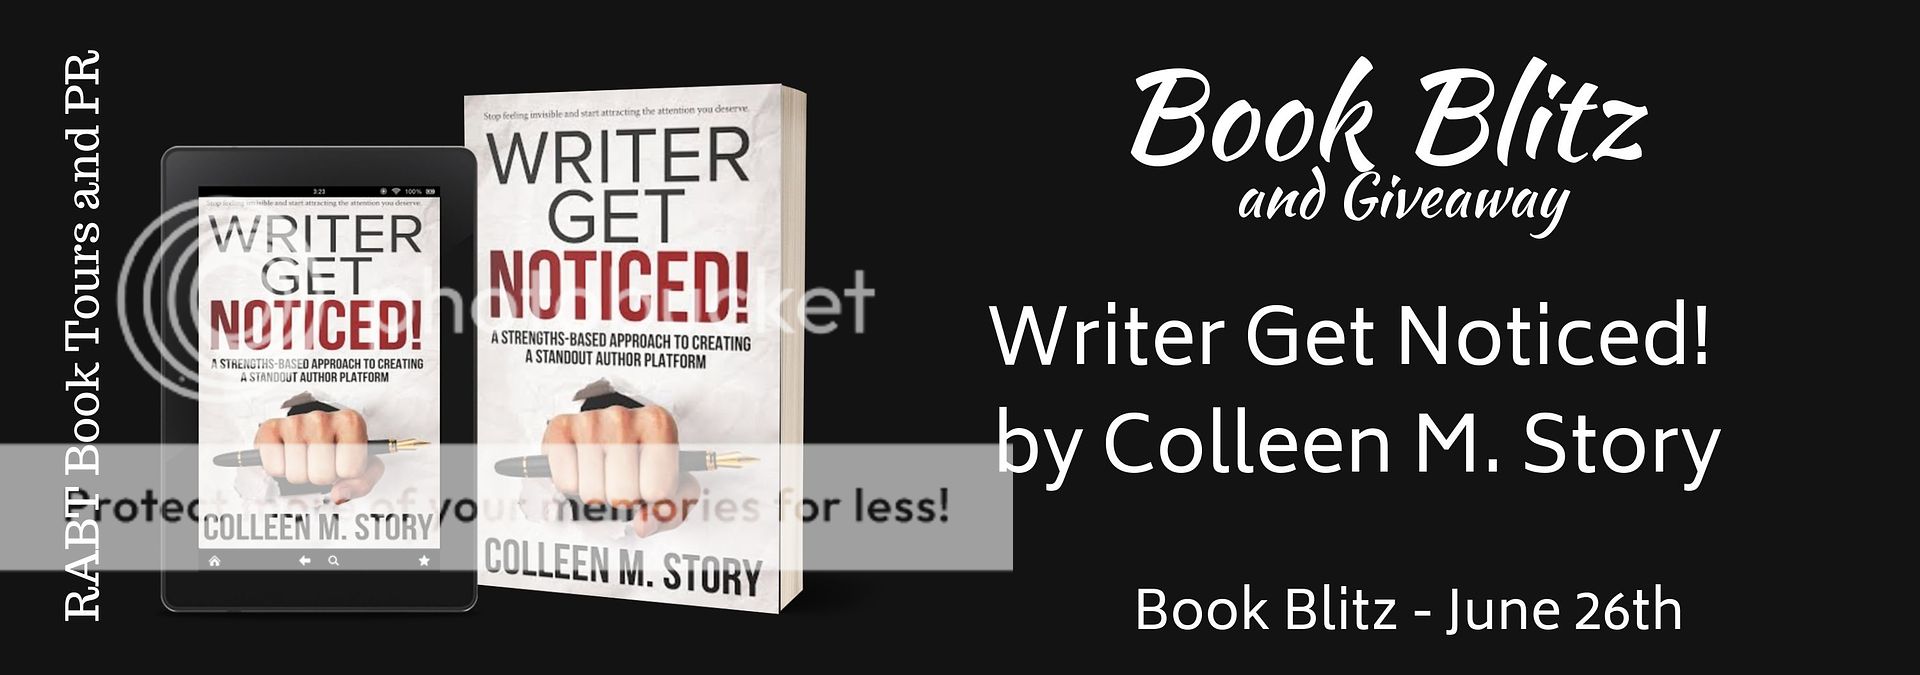 Book Blitz: Writer Get Noticed! by Colleen M. Story @colleen_m_story #nonfiction #promo #giveaway @RABTBookTours